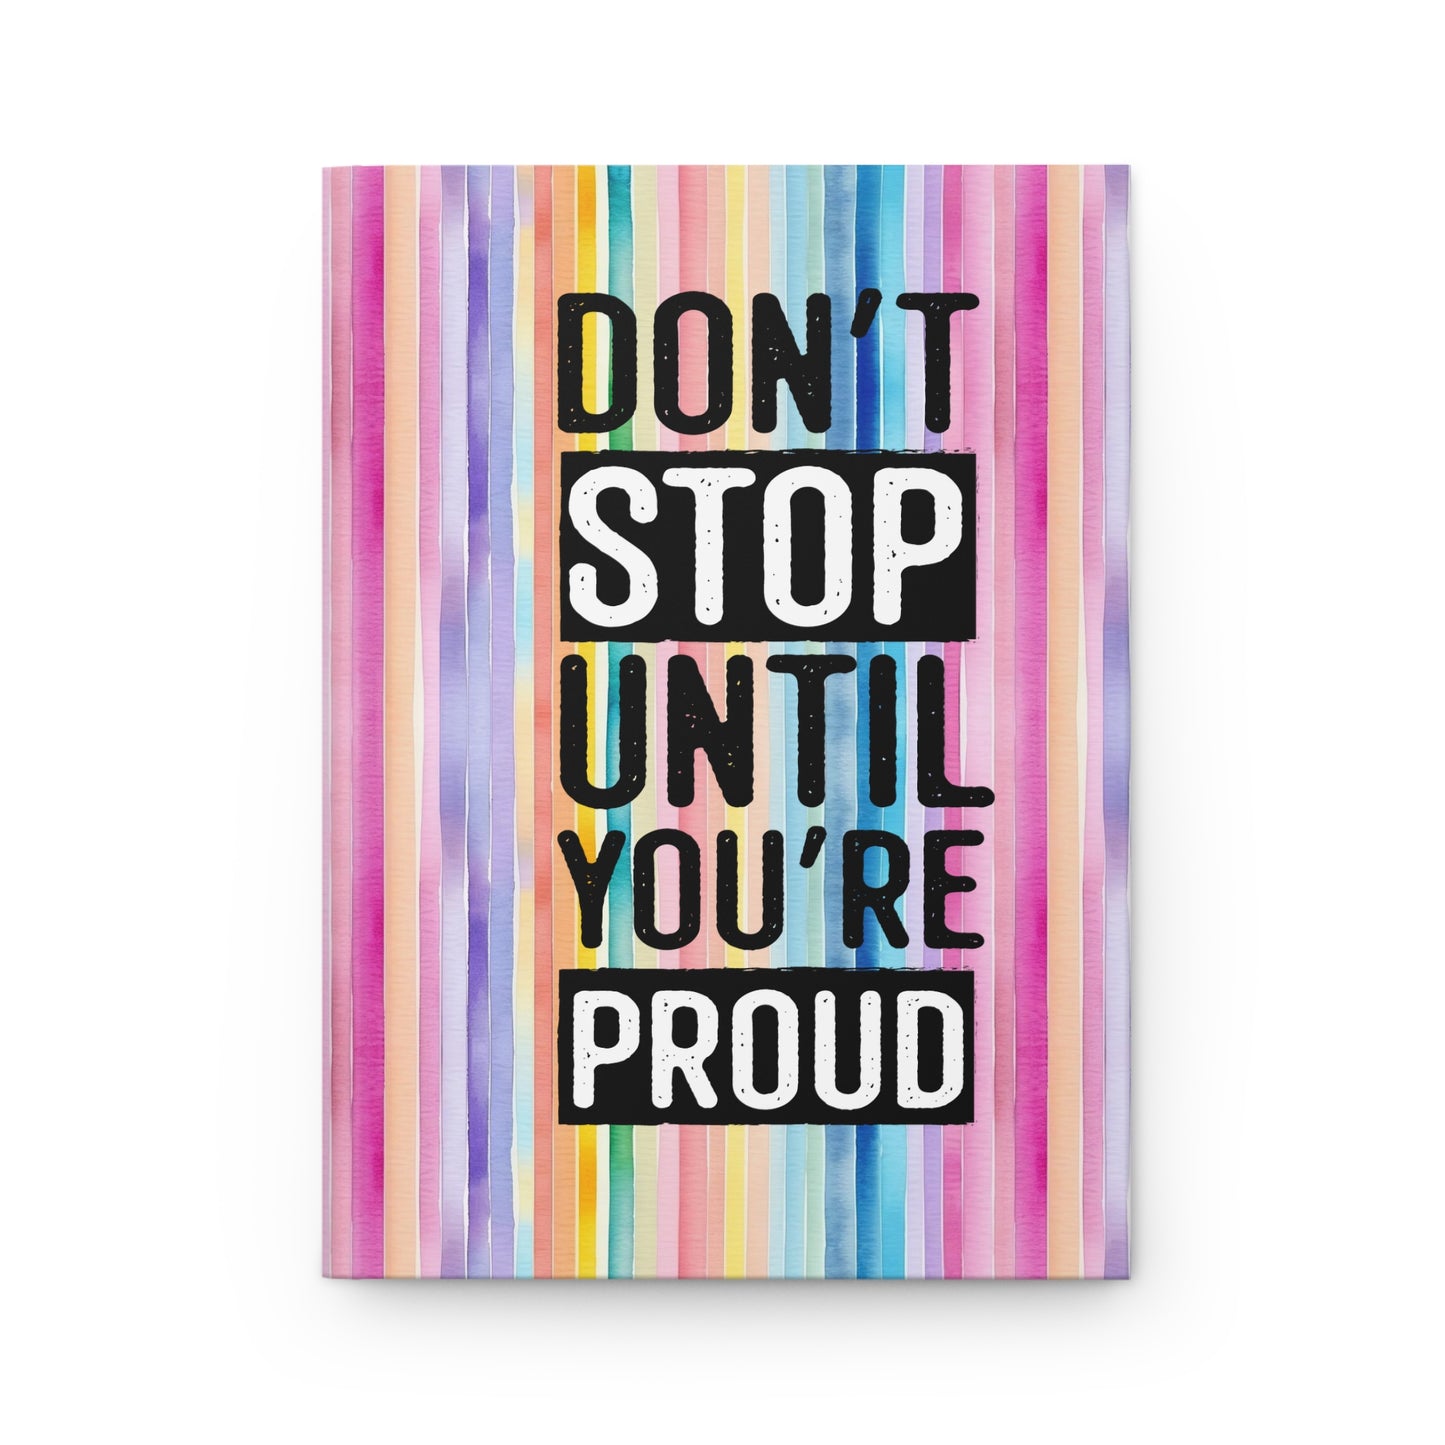 Don't Stop Until You're Proud - Self Love - Inspirational Quote  - Rainbow Watercolor Vertical - Hardcover Journal Matte